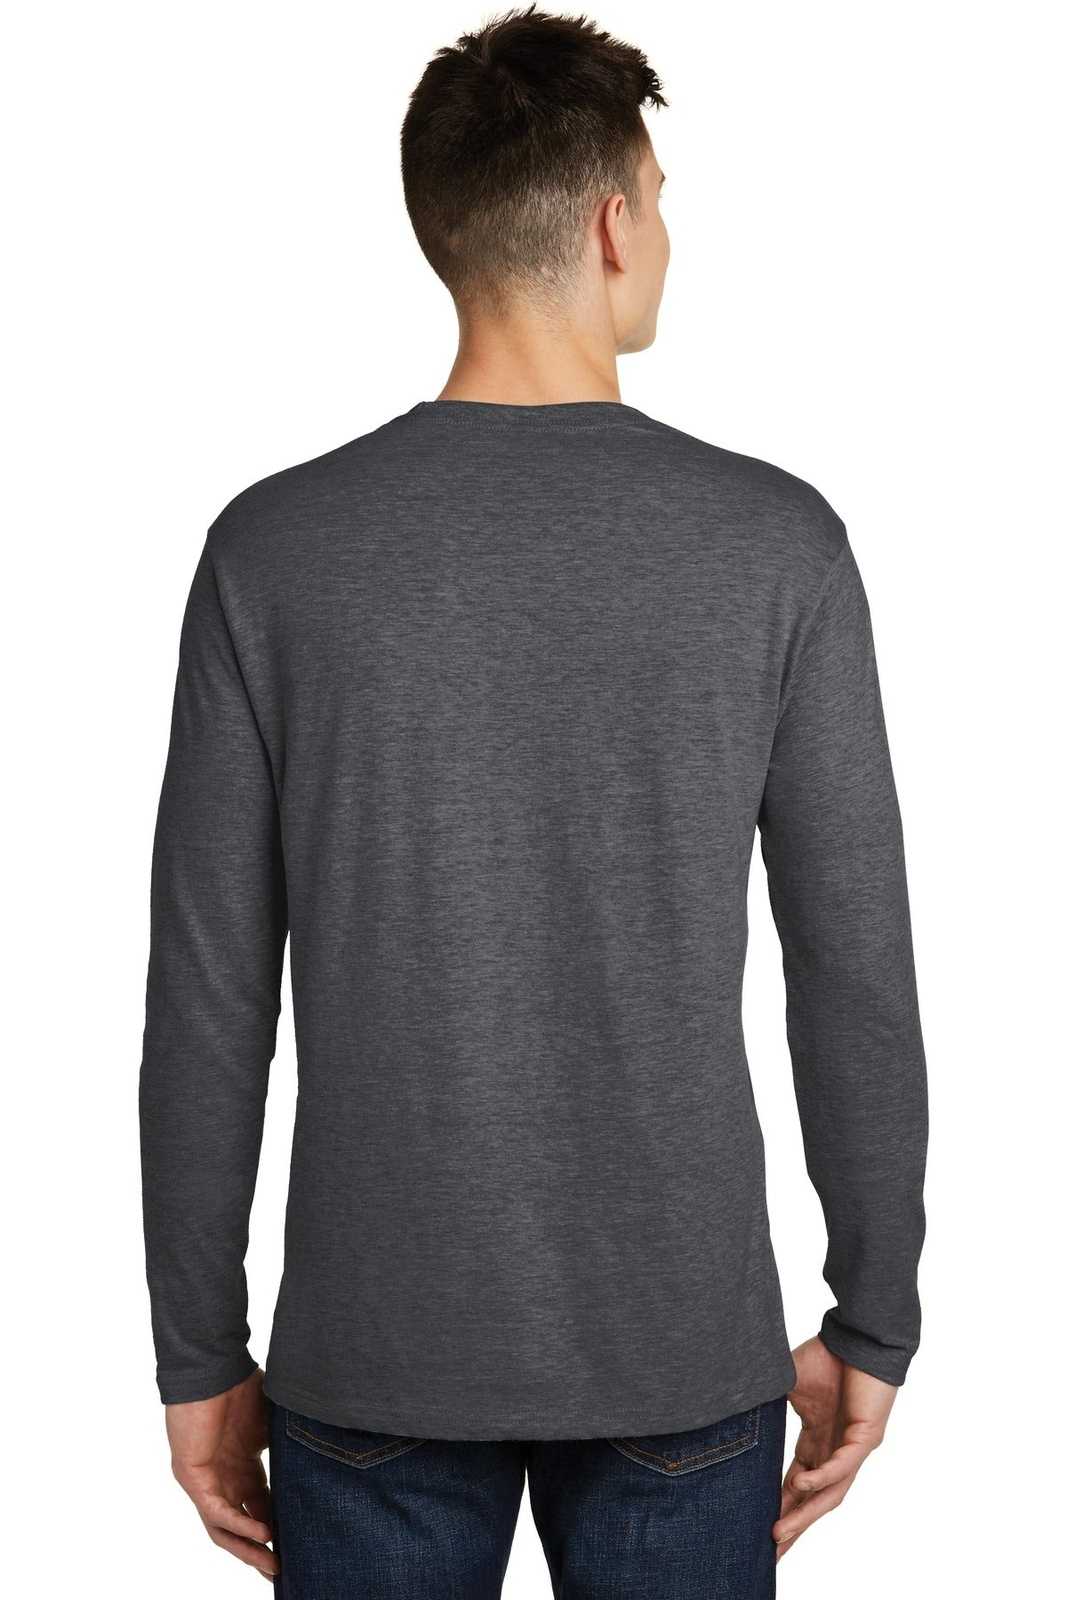 District DT6200 Very Important Tee Long Sleeve - Heathered Charcoal - HIT a Double - 2